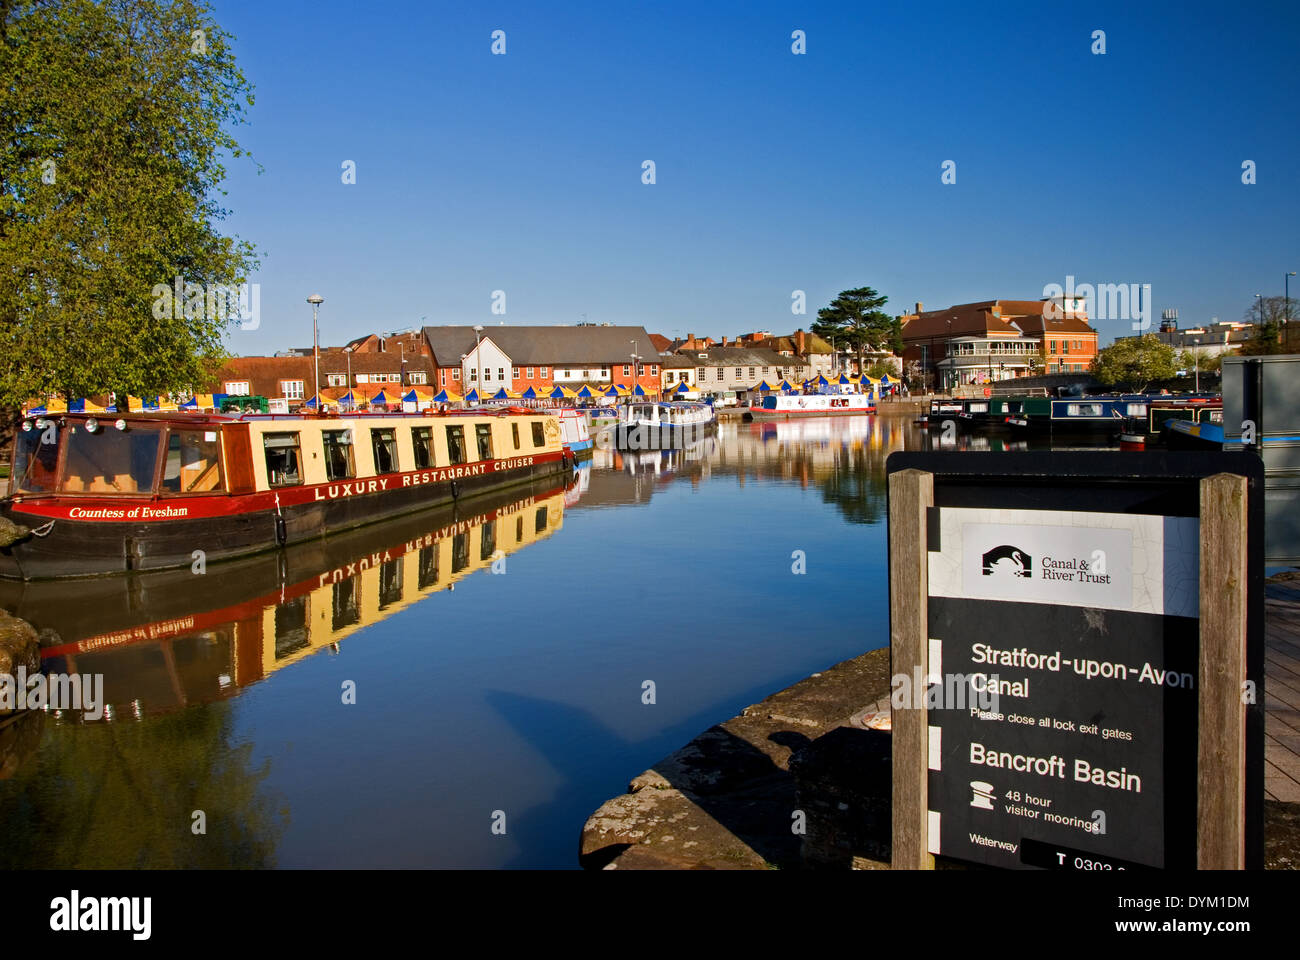 Stratford upon Avon canal ends at Bancroft Basin in the centre of the town, it is the link between canal and River Avon. Stock Photo